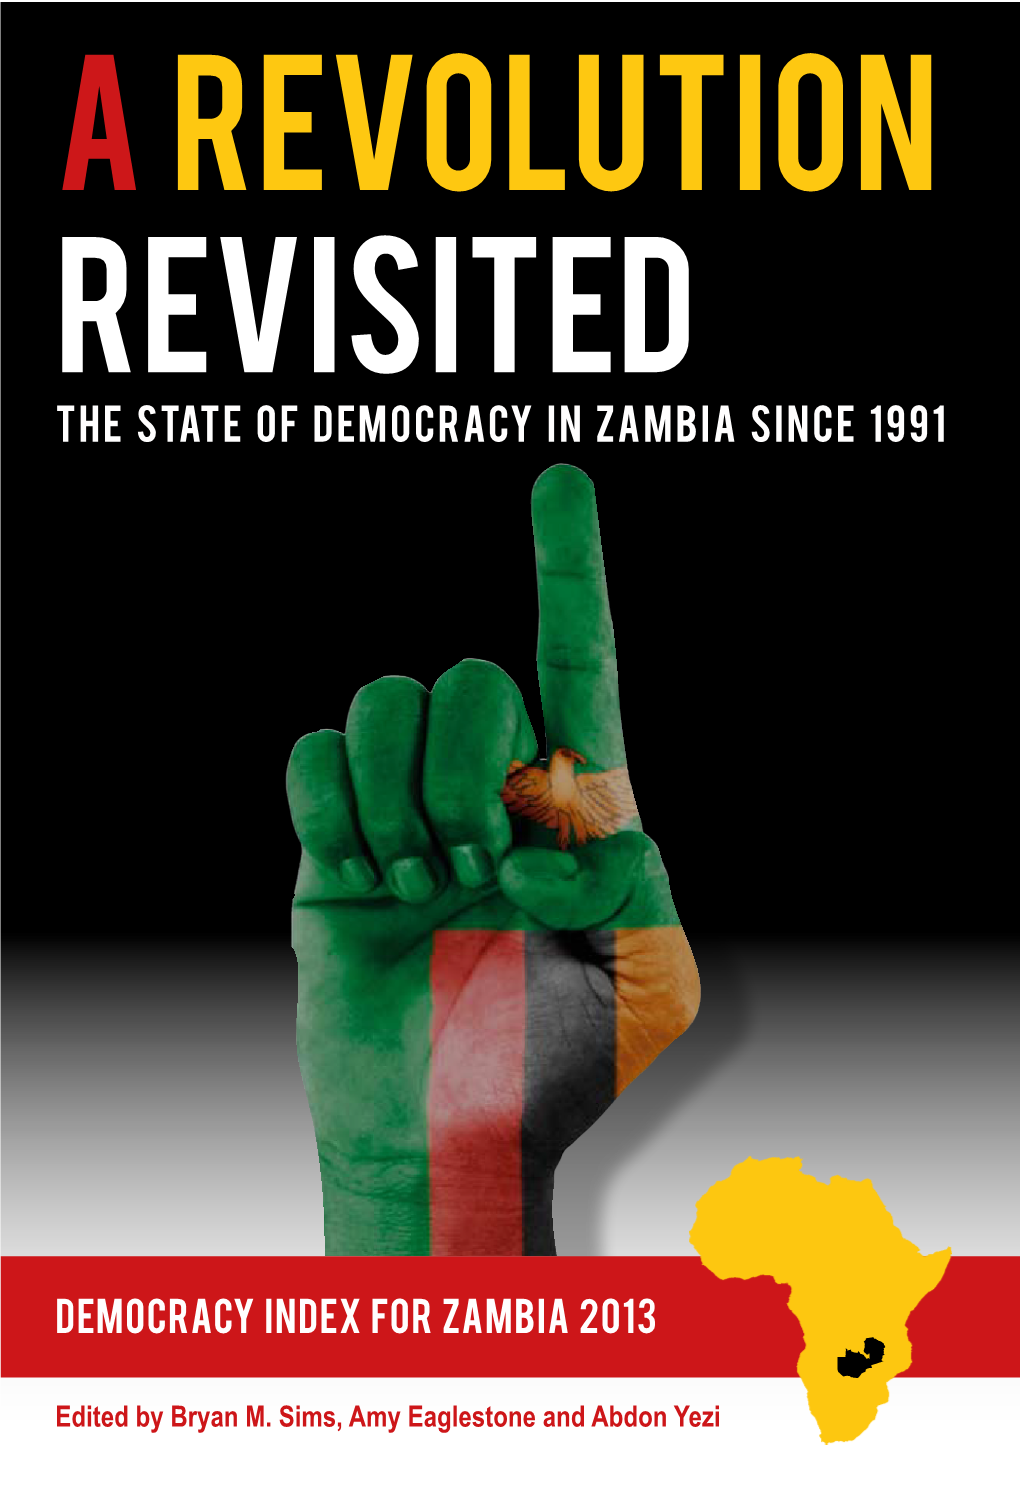 The State of Democracy in Zambia Since 1991